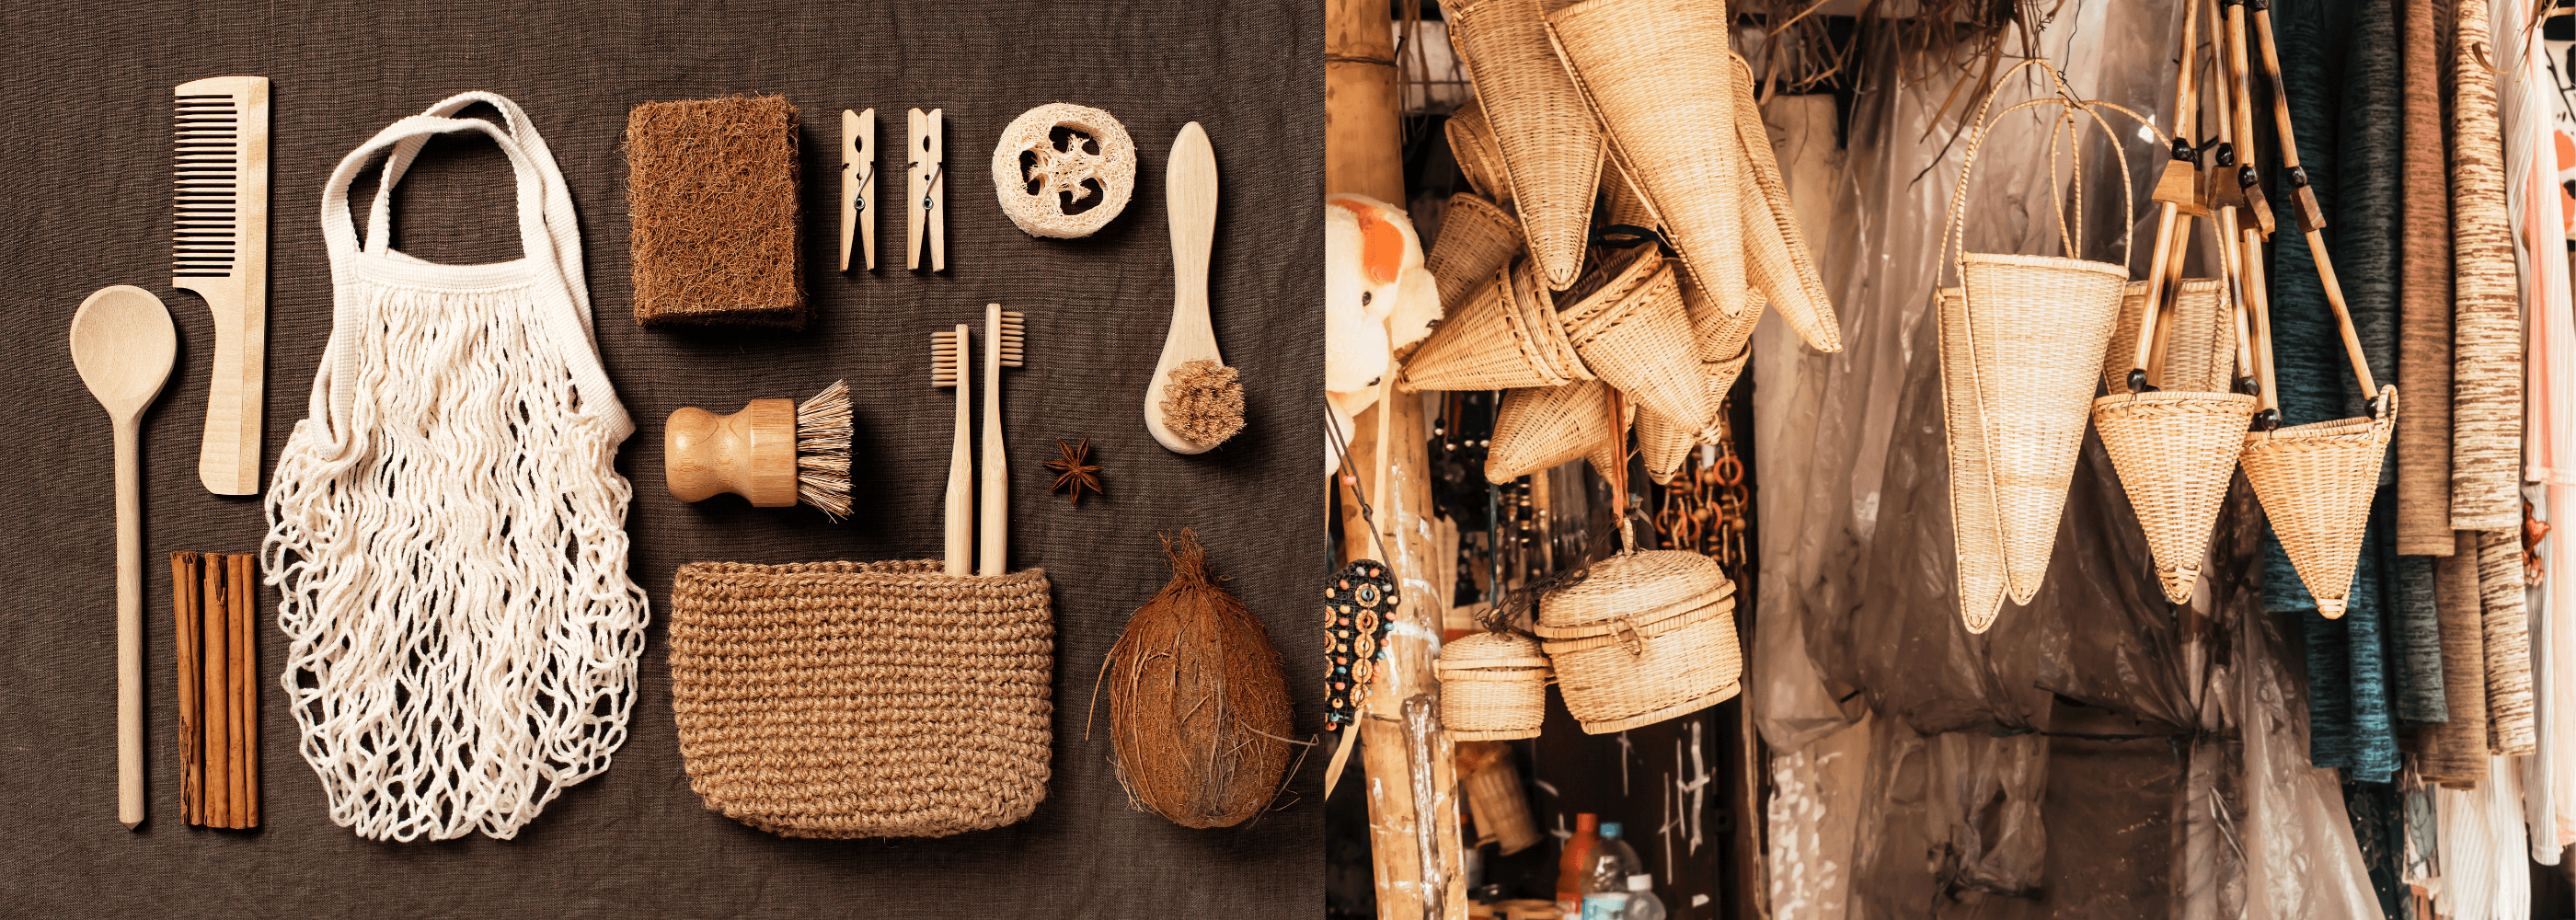 Sustainable home goods